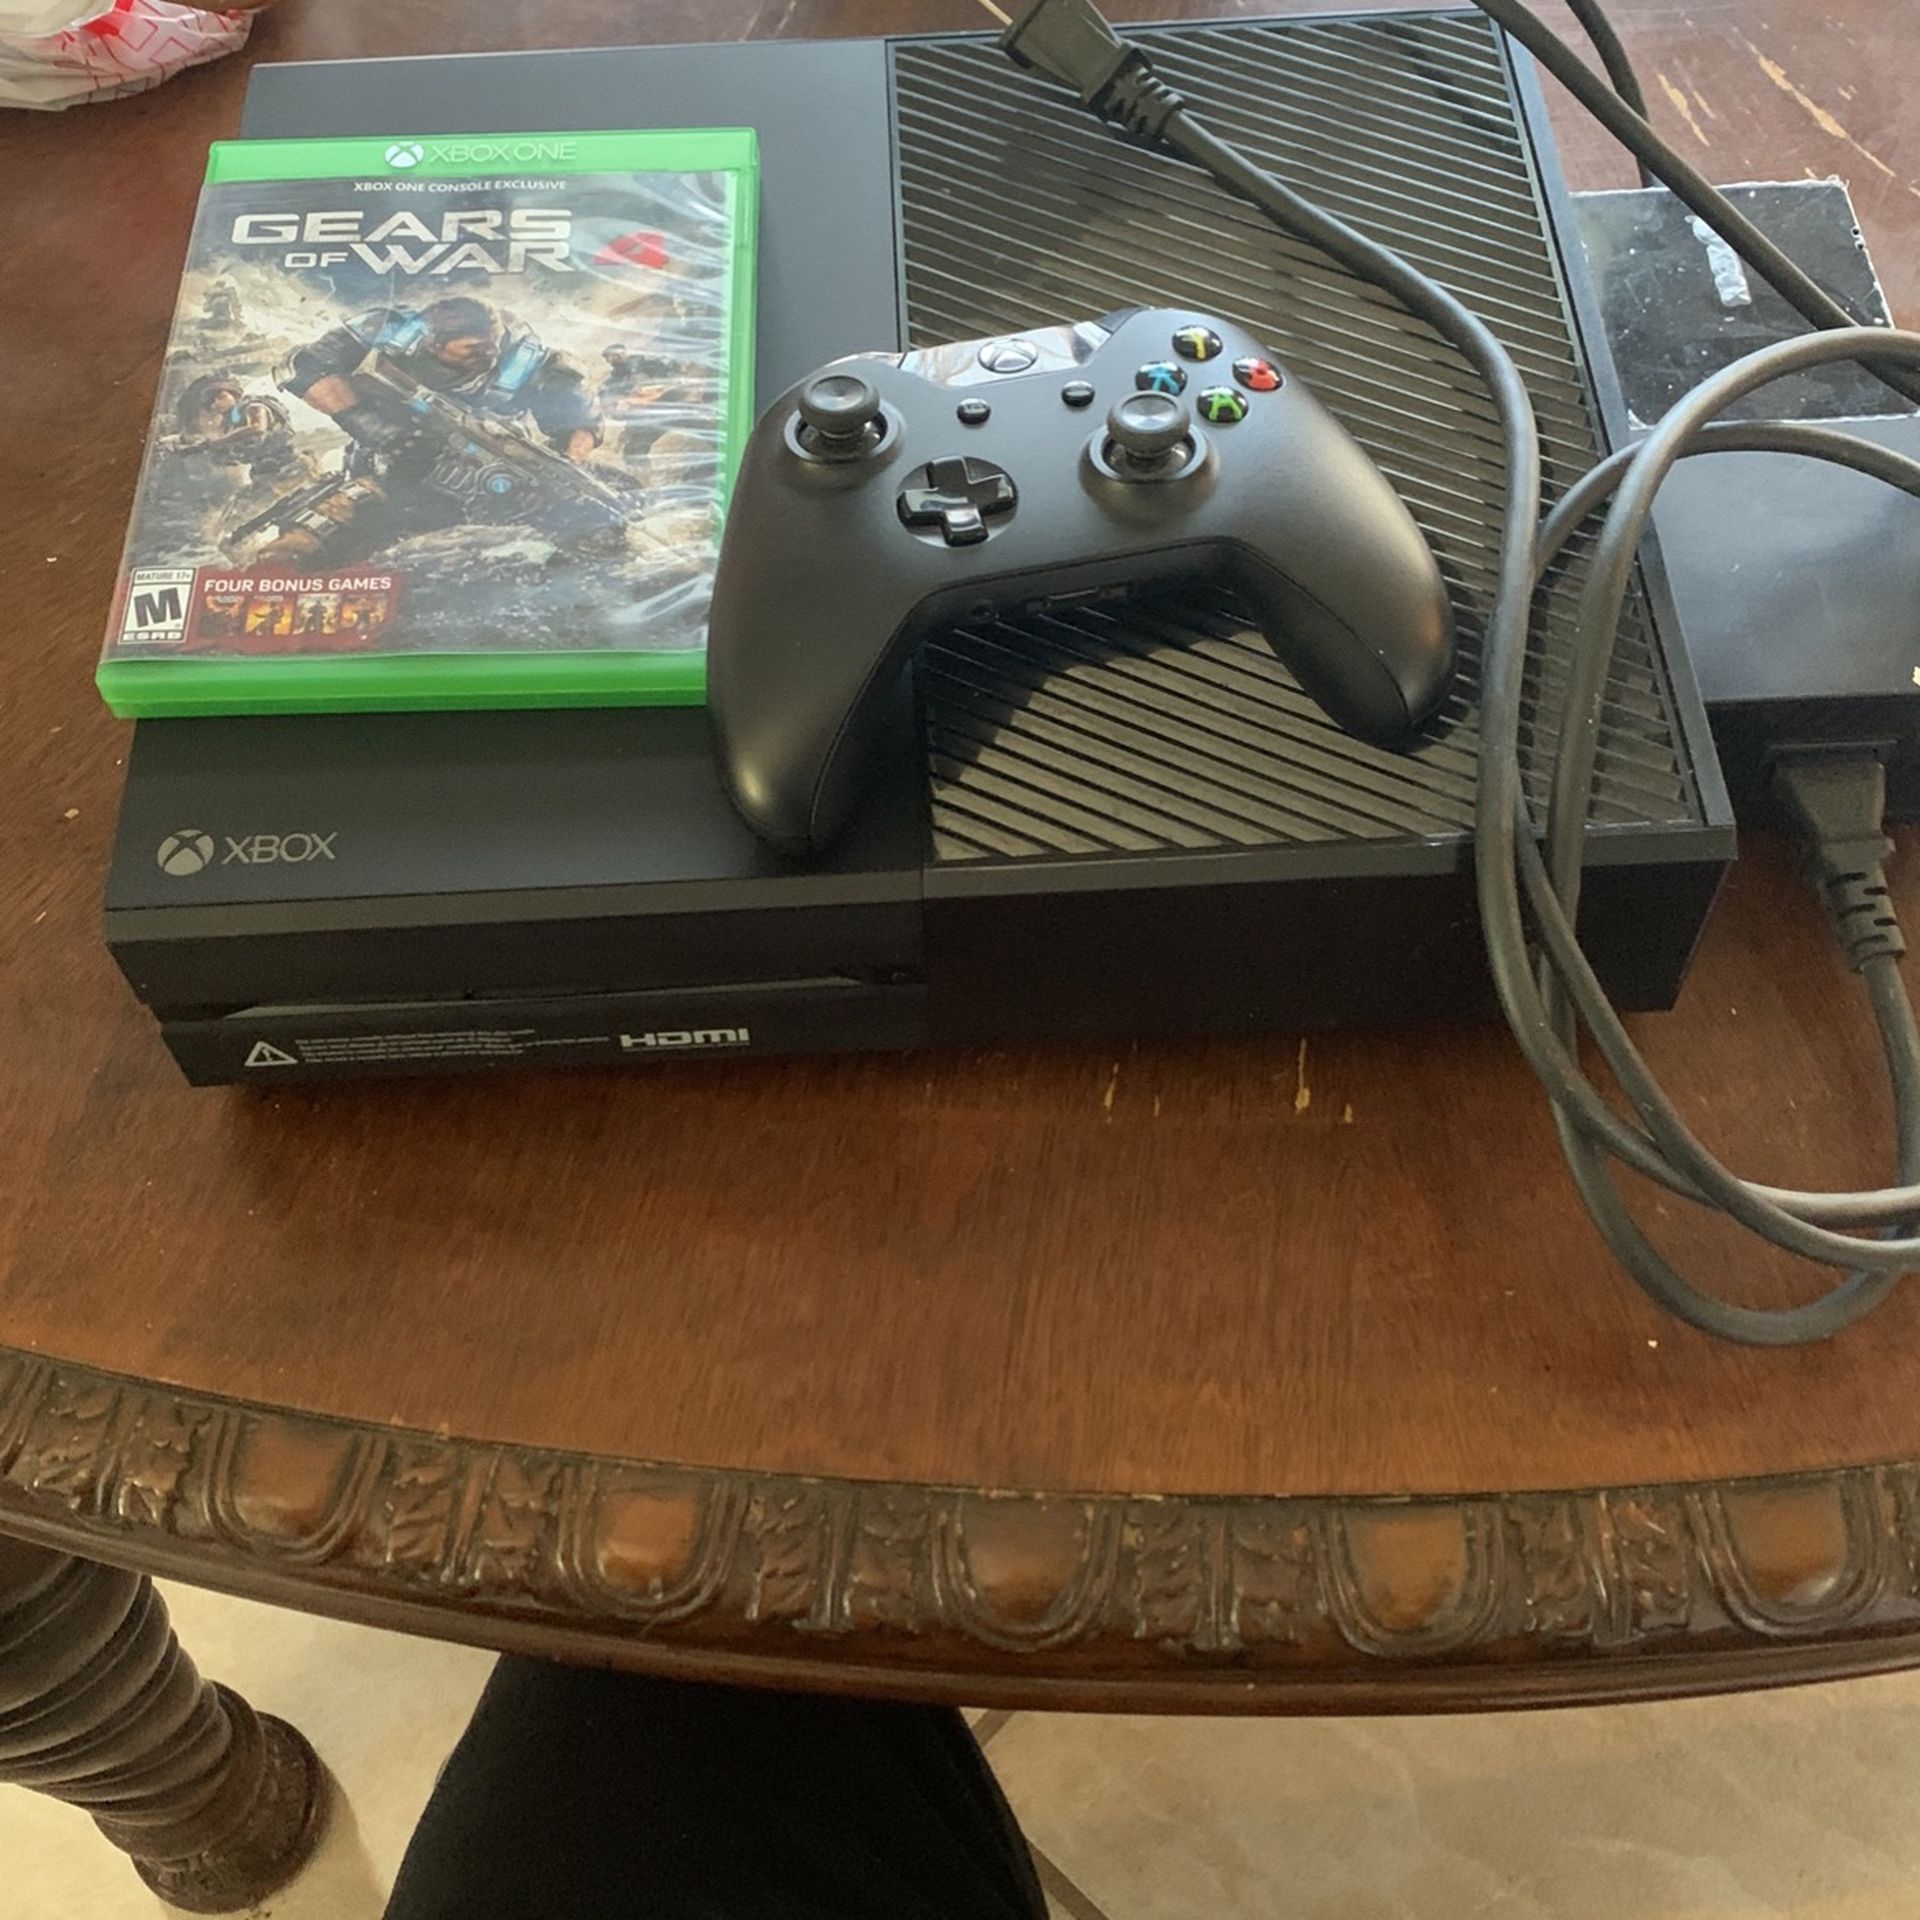 Ananiver progressief Tochi boom Barley Used Xbox 1 Works Perfect $175 for Sale in Las Vegas, NV - OfferUp